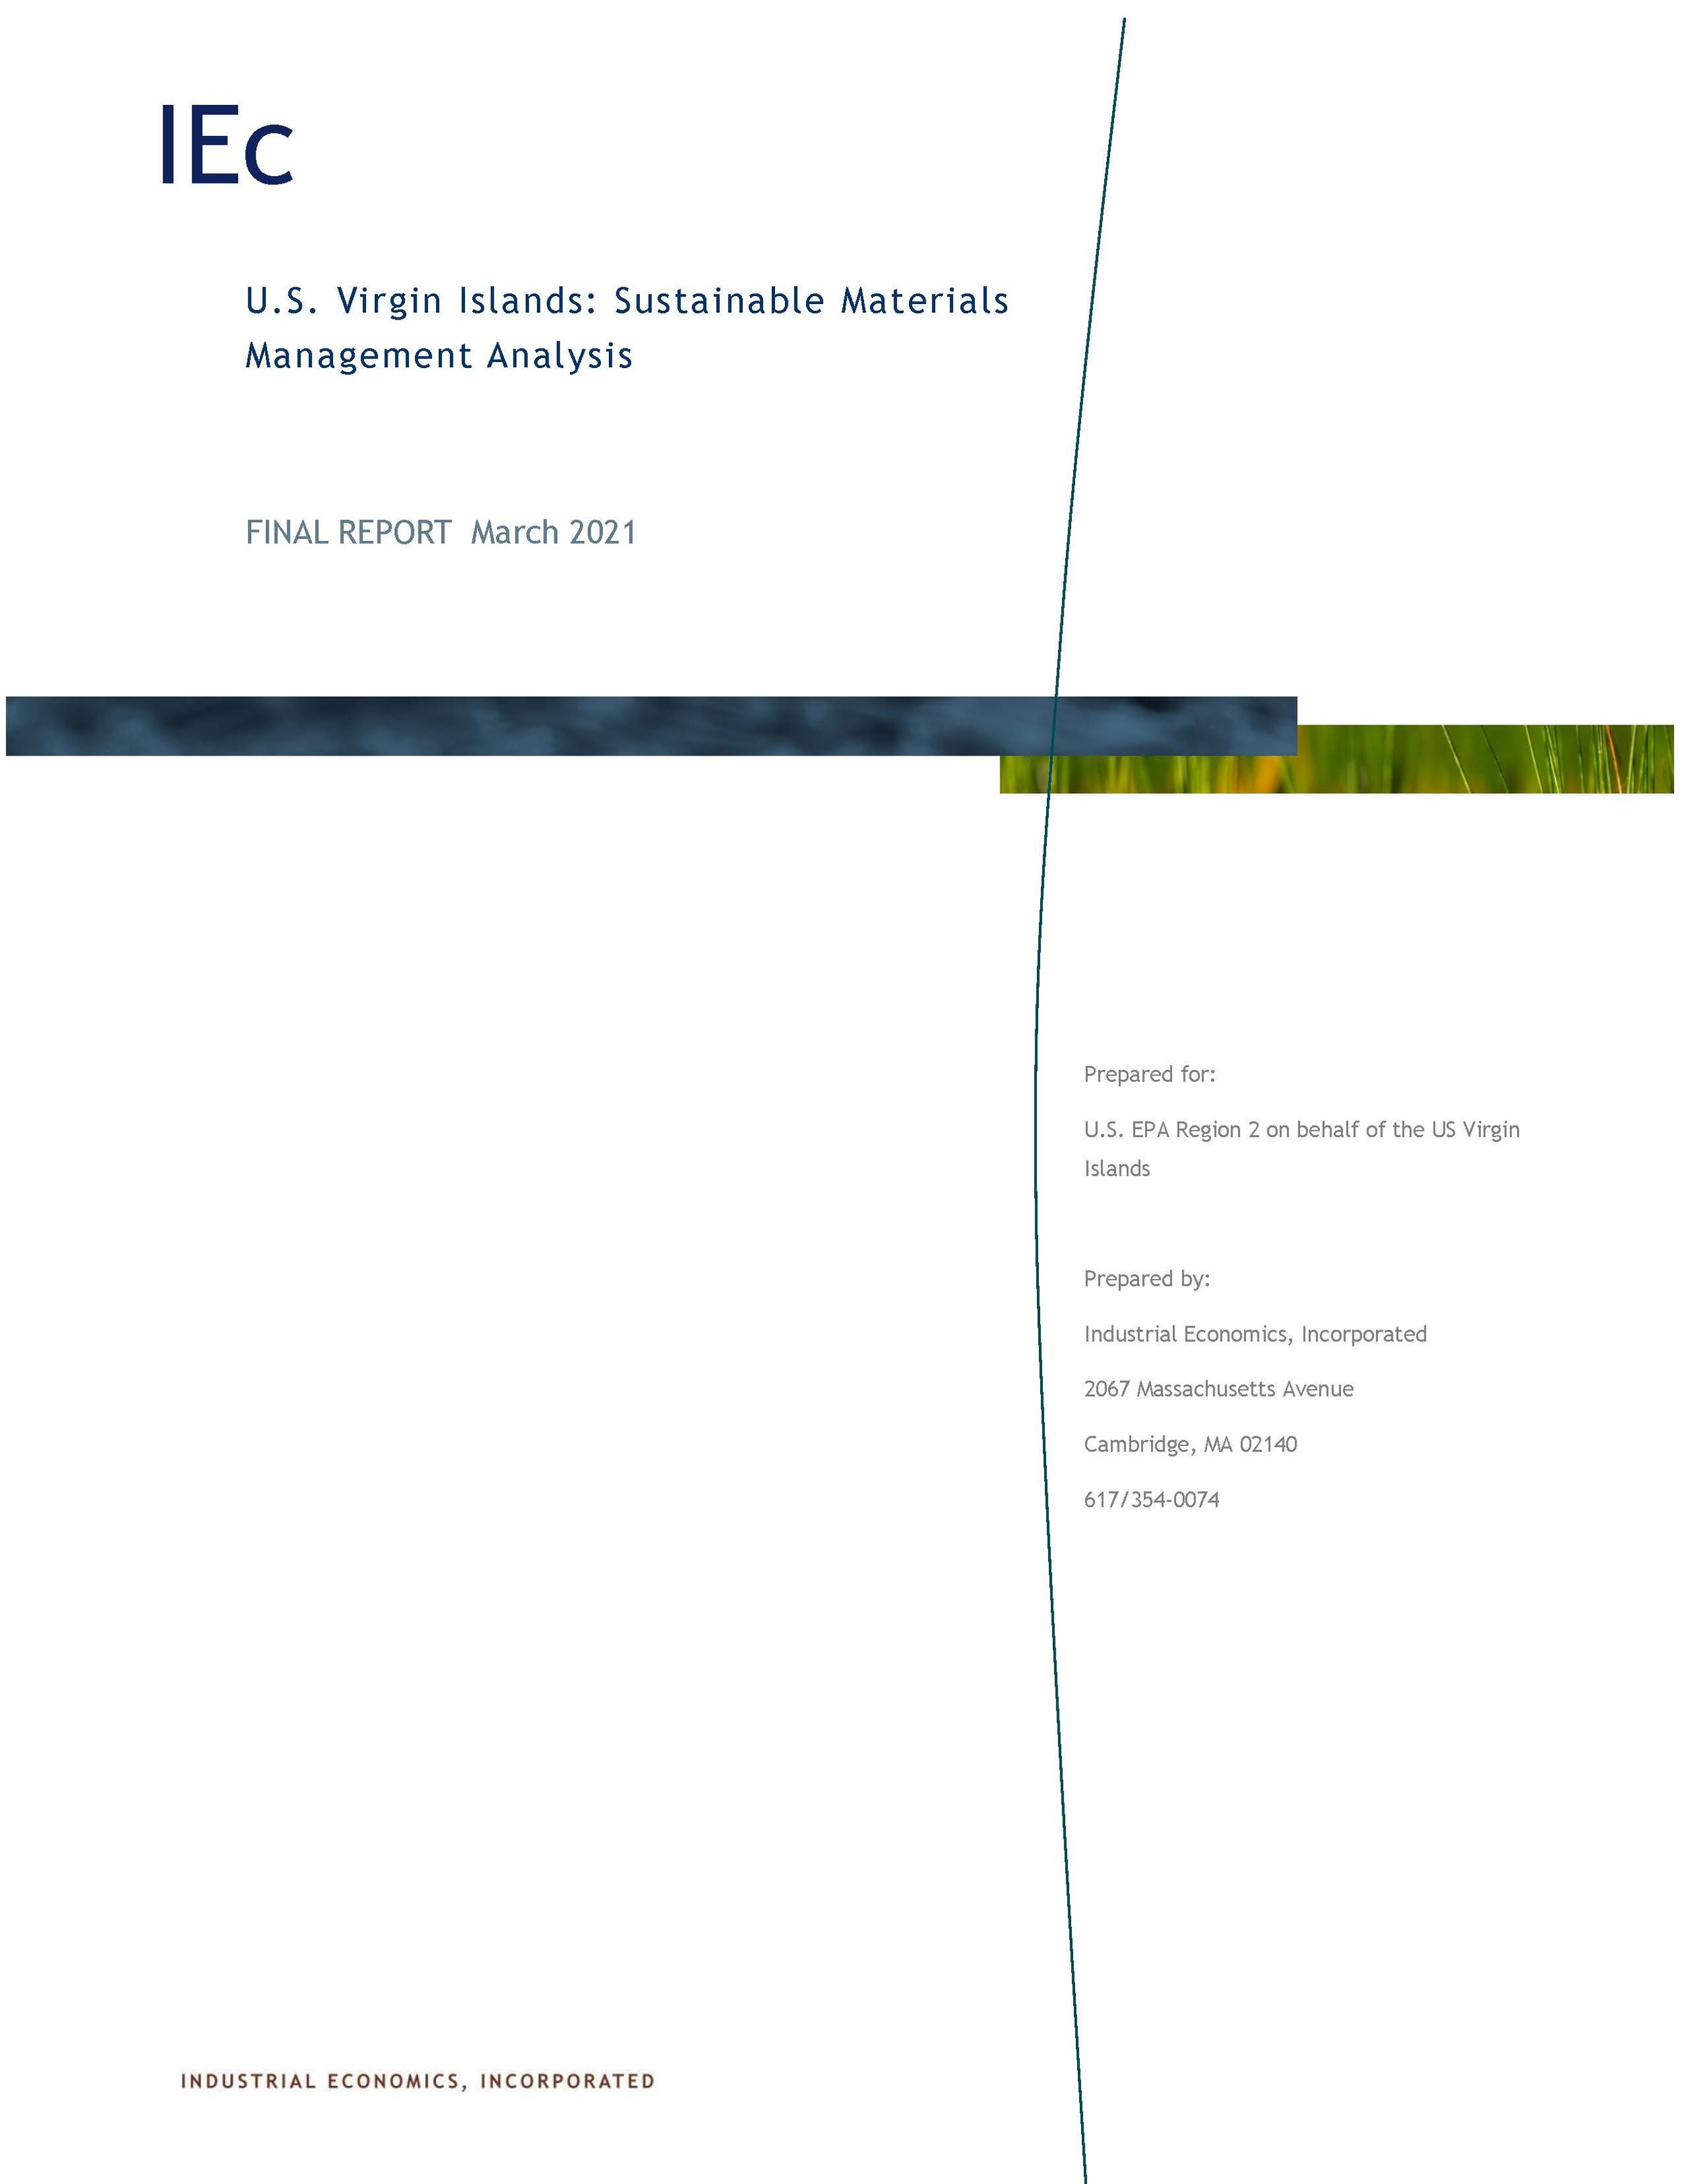 Sustainable Materials Management Analysis Report